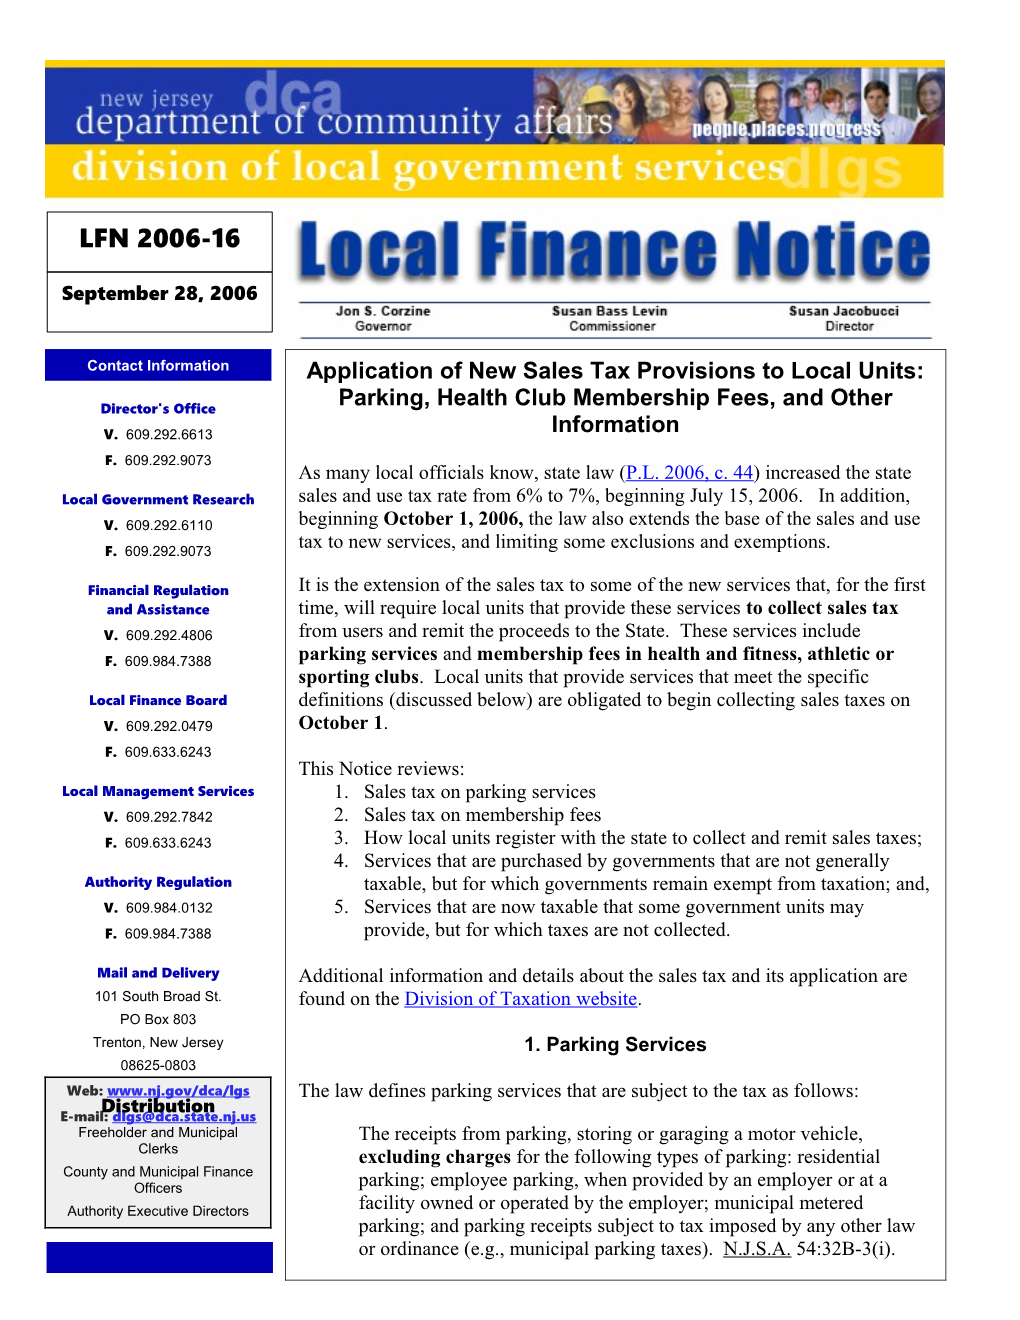 Local Finance Notice 2006-16September 28, 2006Page 1